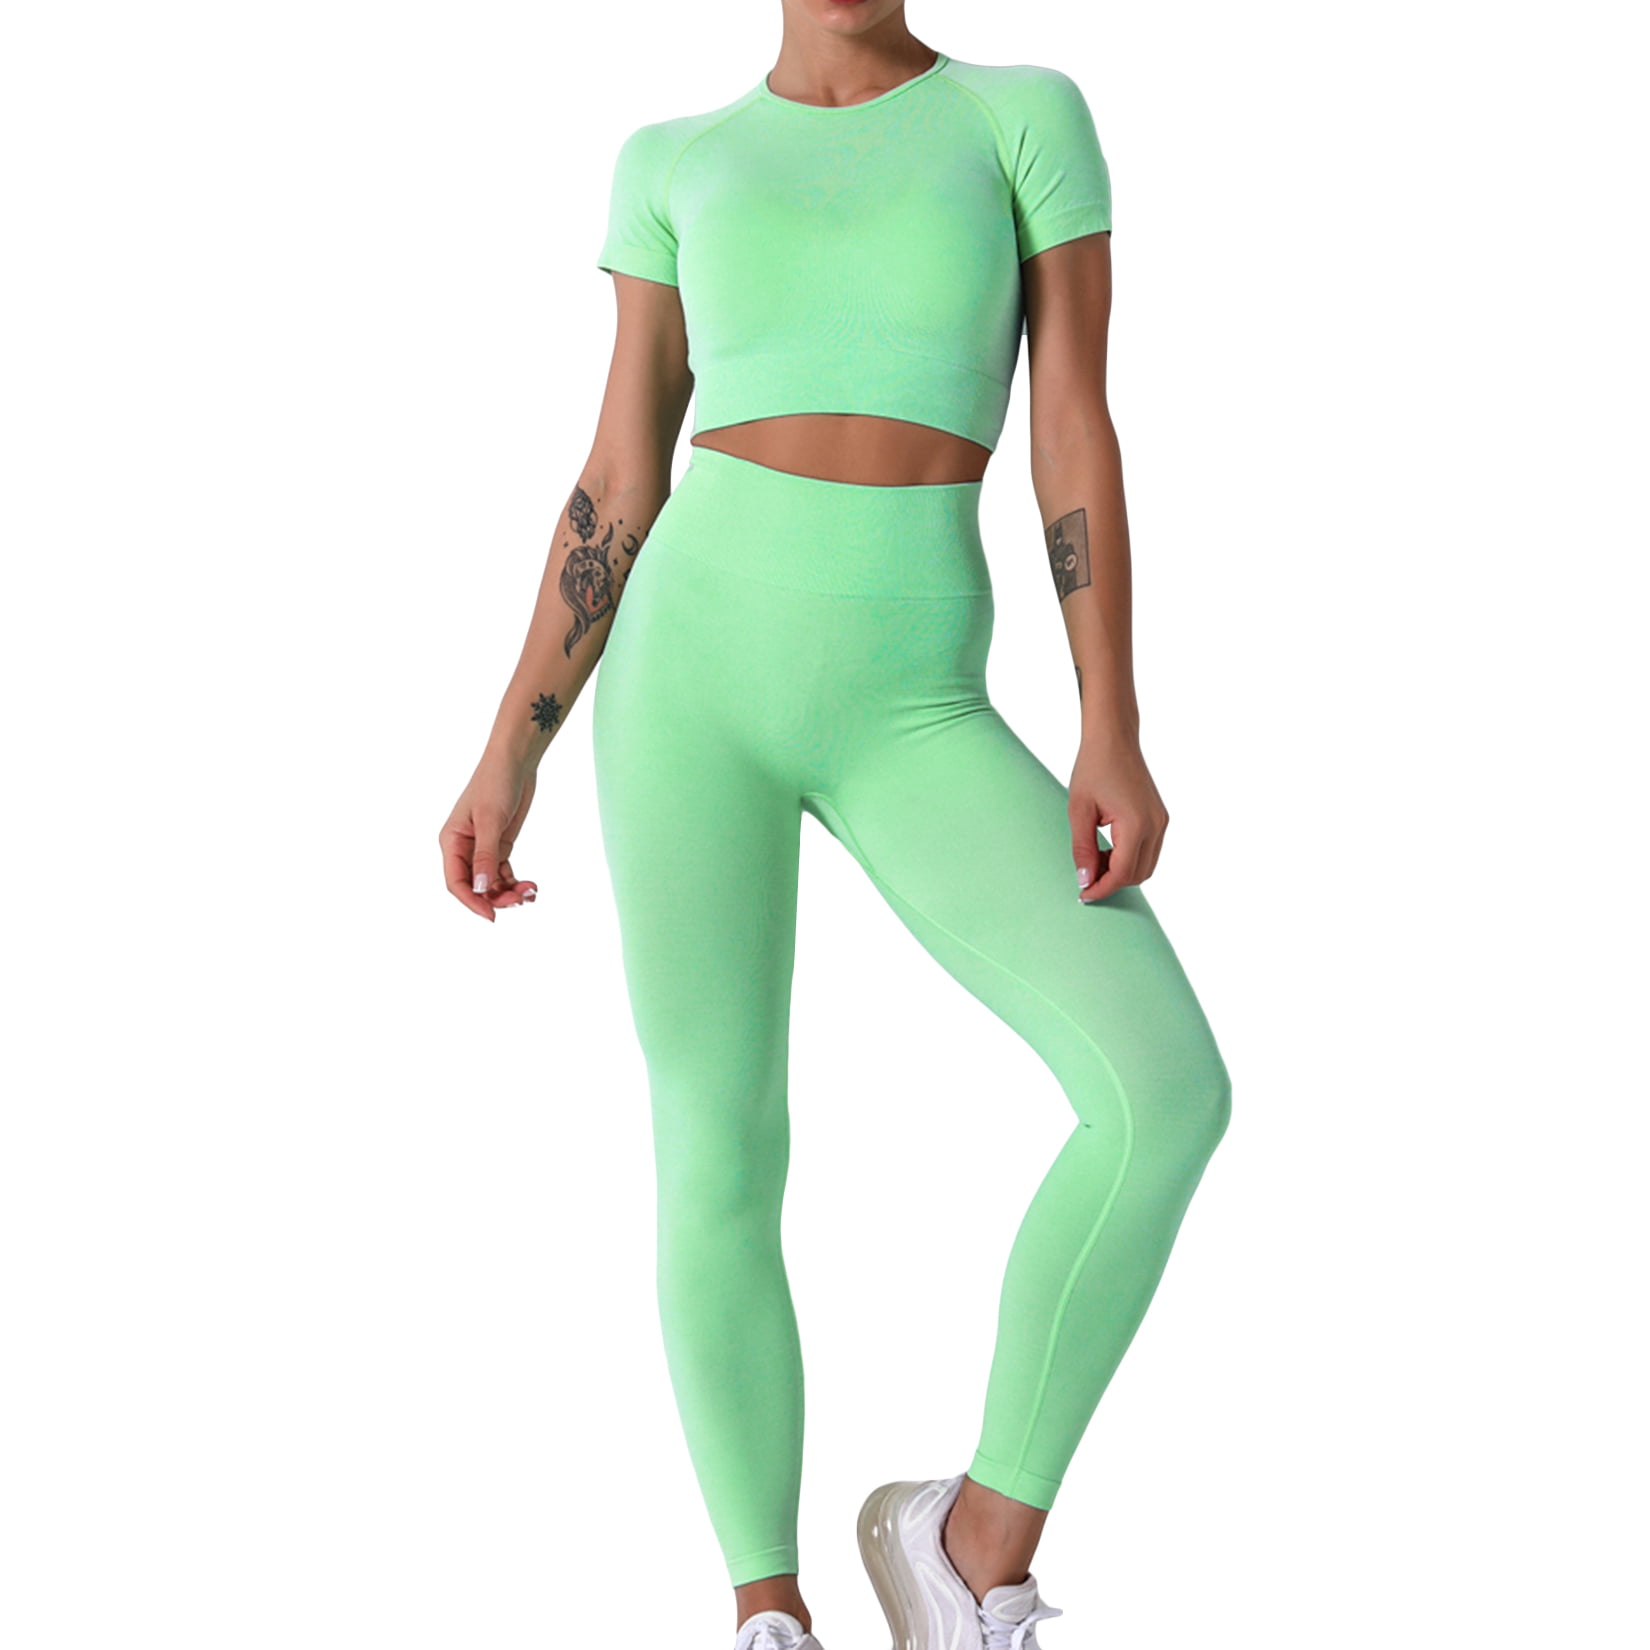 Lu's Chic Women's 2 Piece Outfits Crop Top and Leggings Workout